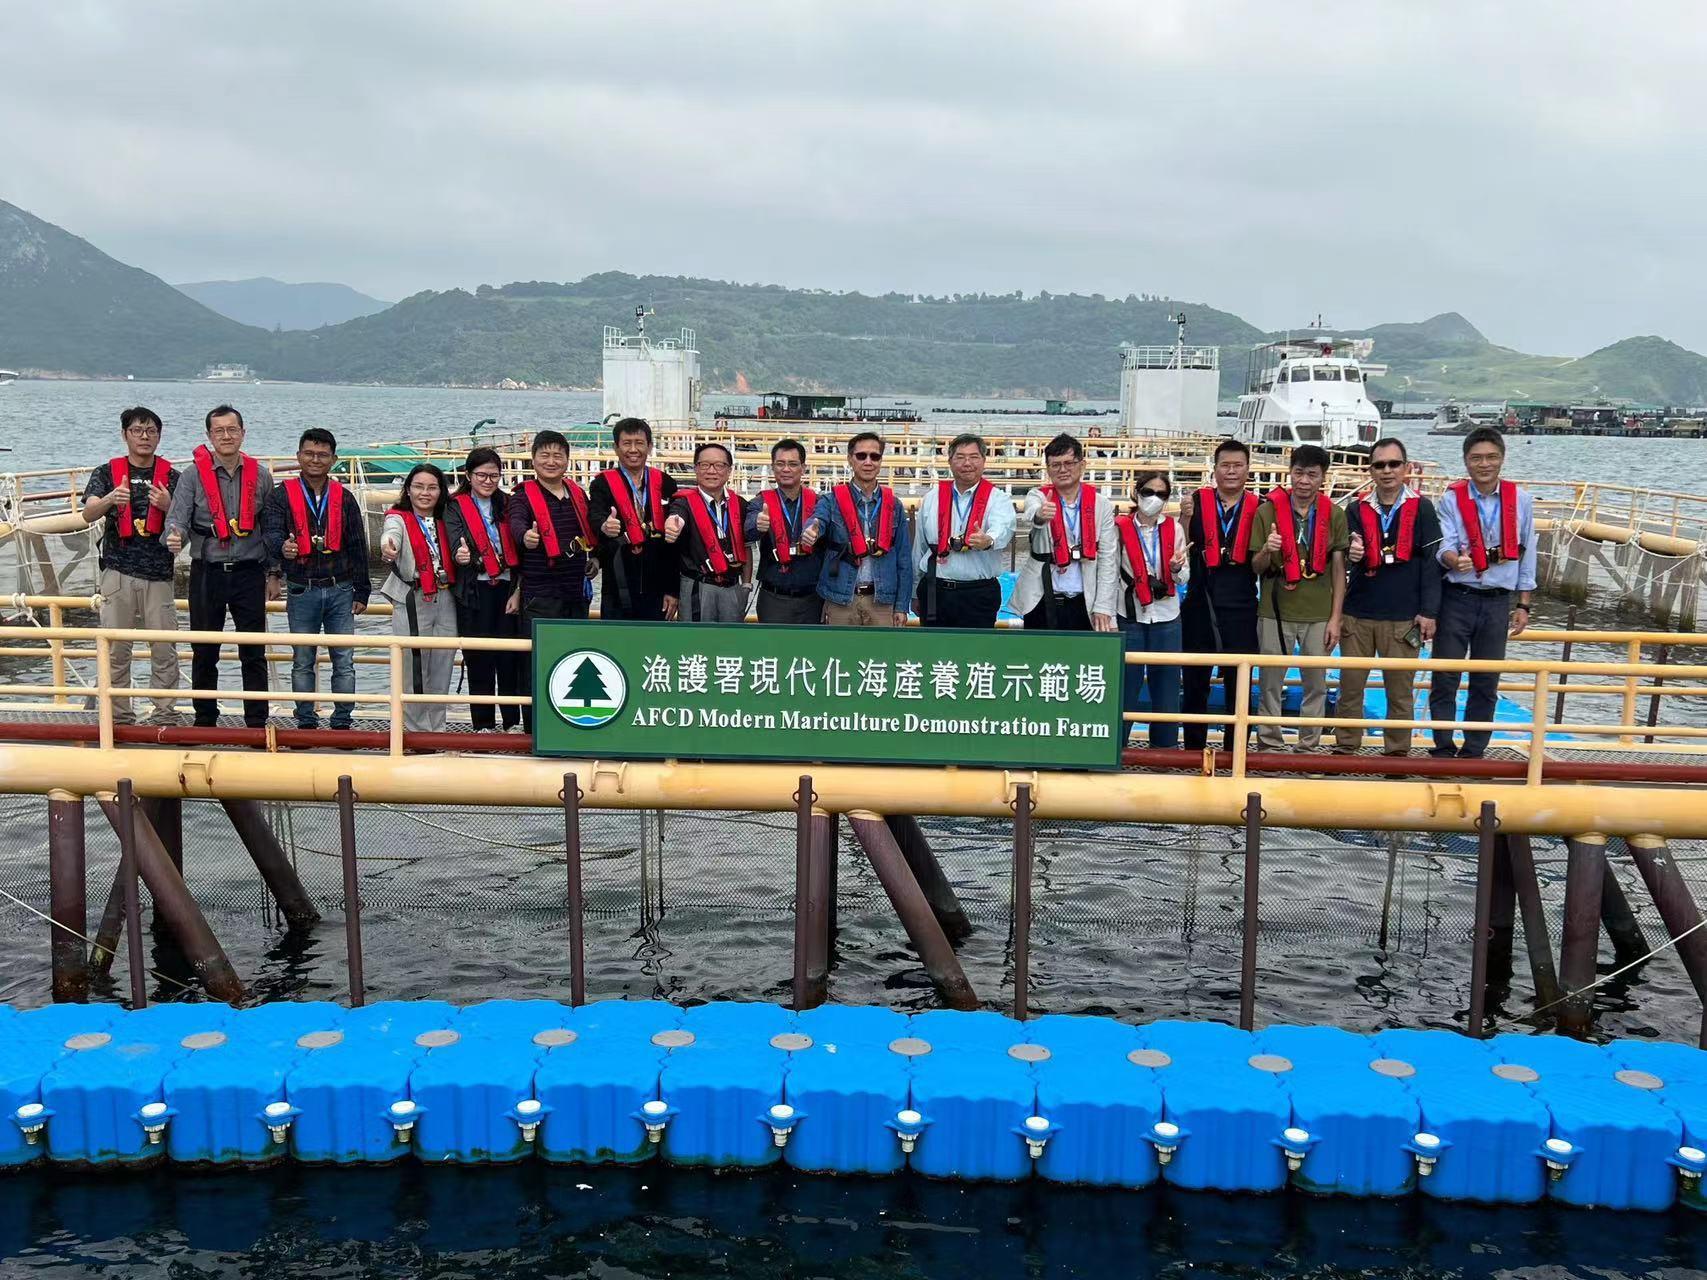 The Environmental Protection Department (EPD) arranged delegations from the Belt and Road (B&R) countries (namely Laos, Vietnam and Myanmar) and representatives from the Research Center for Eco-Environmental Sciences (RCEES) of the Chinese Academy of Sciences (CAS) attending Eco Expo Asia to visit local aquaculture farms, water treatment works and sewage treatment facilities. Photo shows the B&R delegations and representatives from the RCEES of CAS visiting the Agriculture, Fisheries and Conservation Department (AFCD)'s modern mariculture demonstration farm at Tung Lung Chau with officers from the EPD and AFCD on October 28.